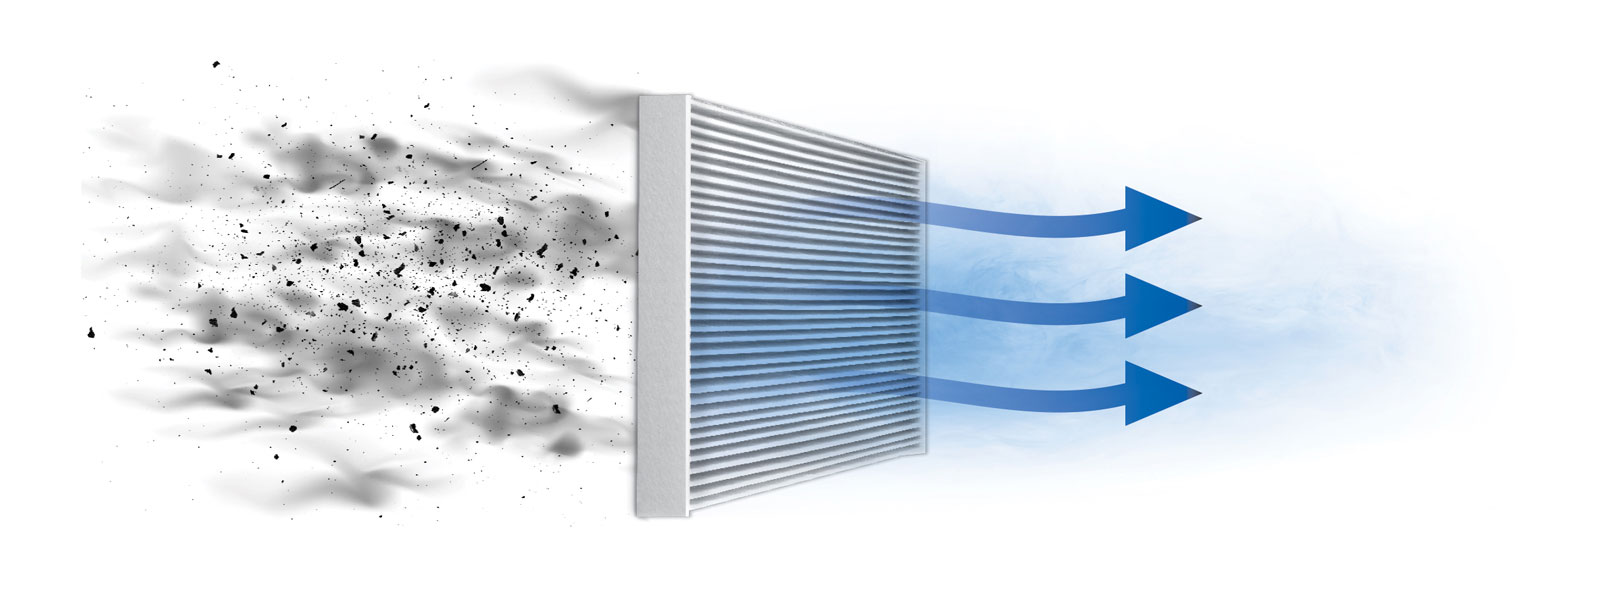 FRAM Drive Cabin Air Filter optimizes clean air flow and maintains peak HVAC system performance.